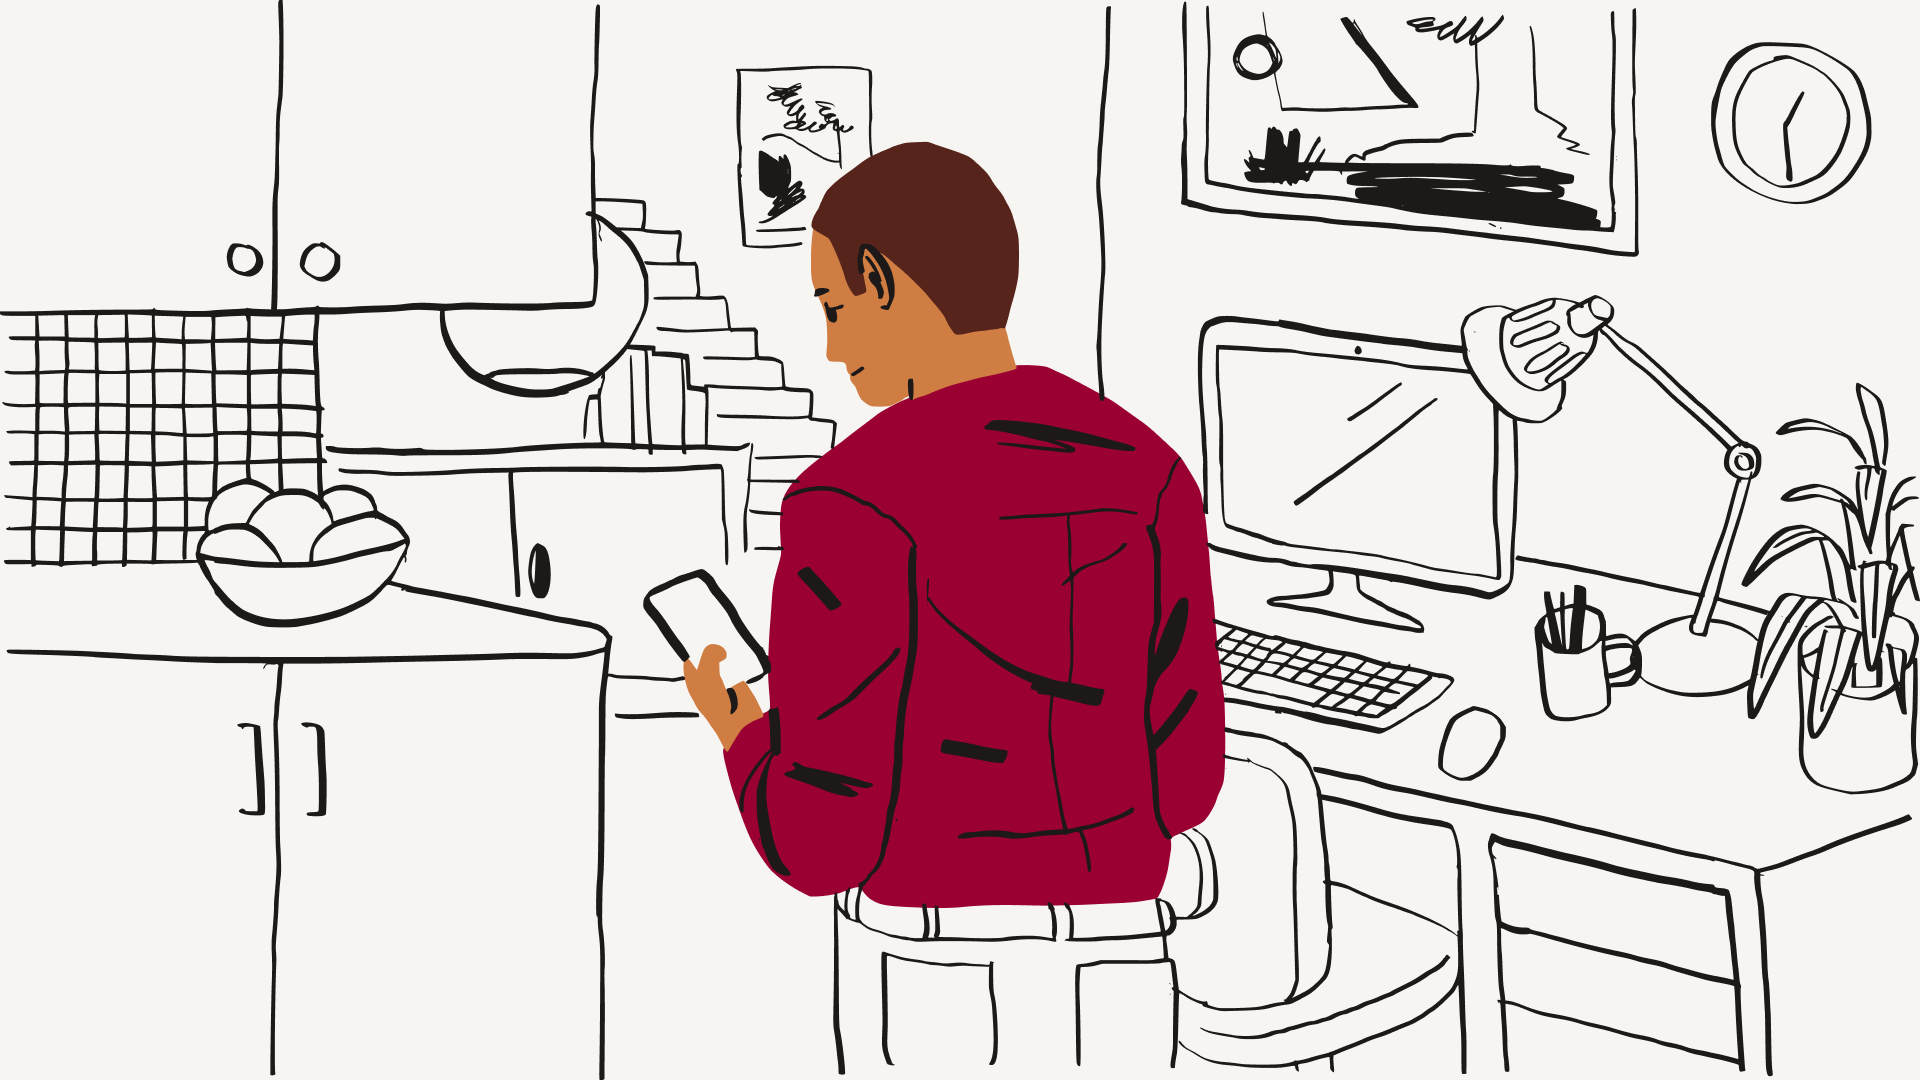 An illustration of a person wearing a red shirt looking at a mobile phone next to a desk with a monitor and keyboard